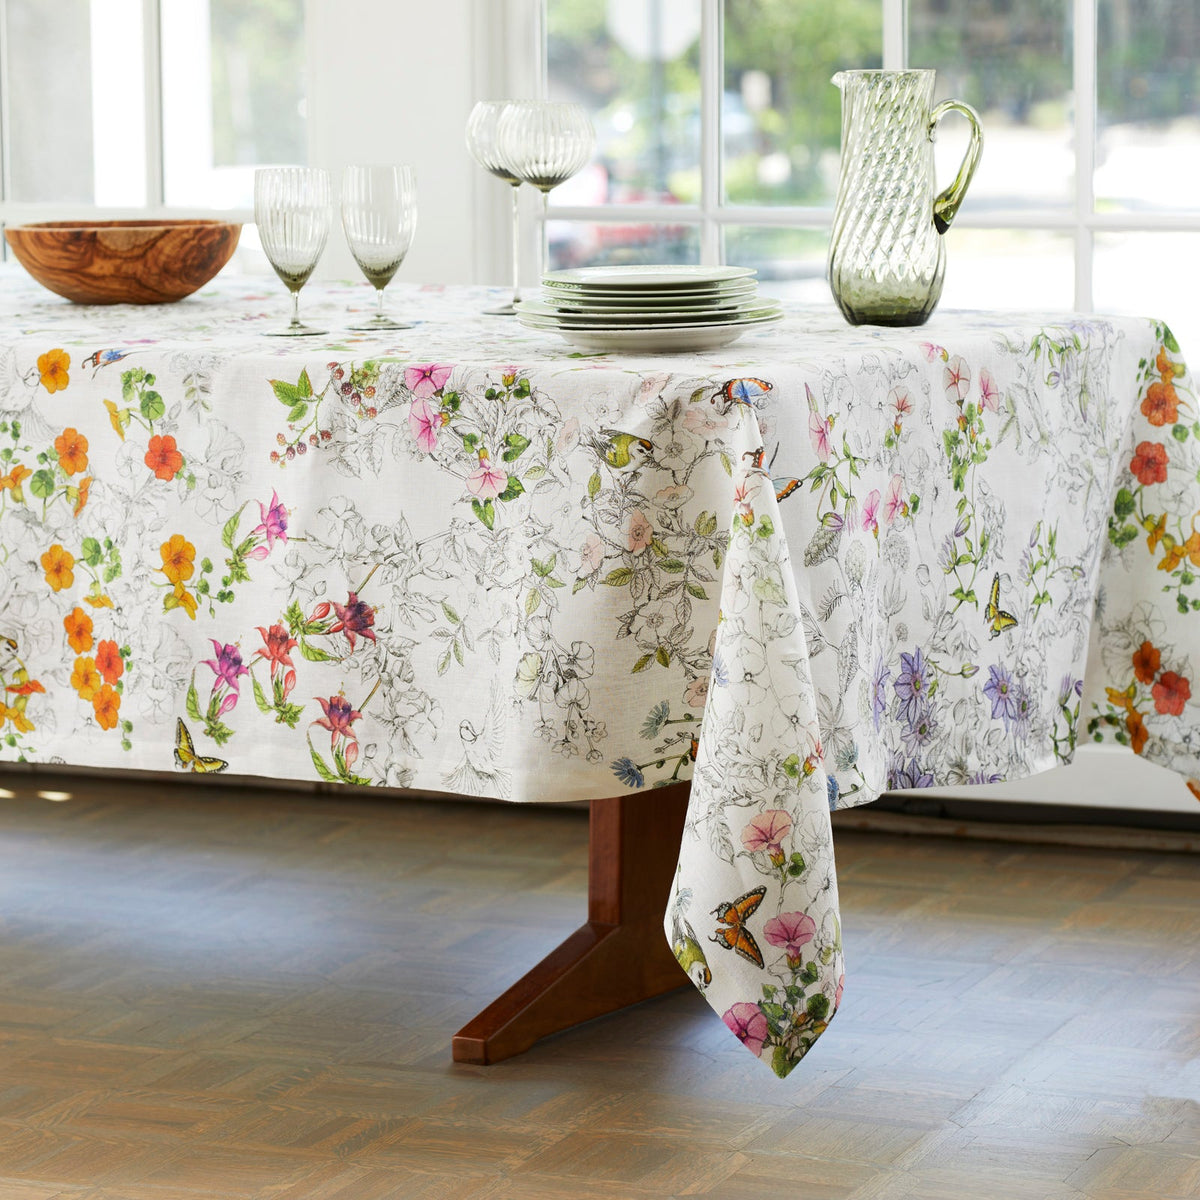 Graphic Nasturtiums Tablecloth Print of engravings, butterflies, birds and florals in watercolor on Italian Linen from Caskata